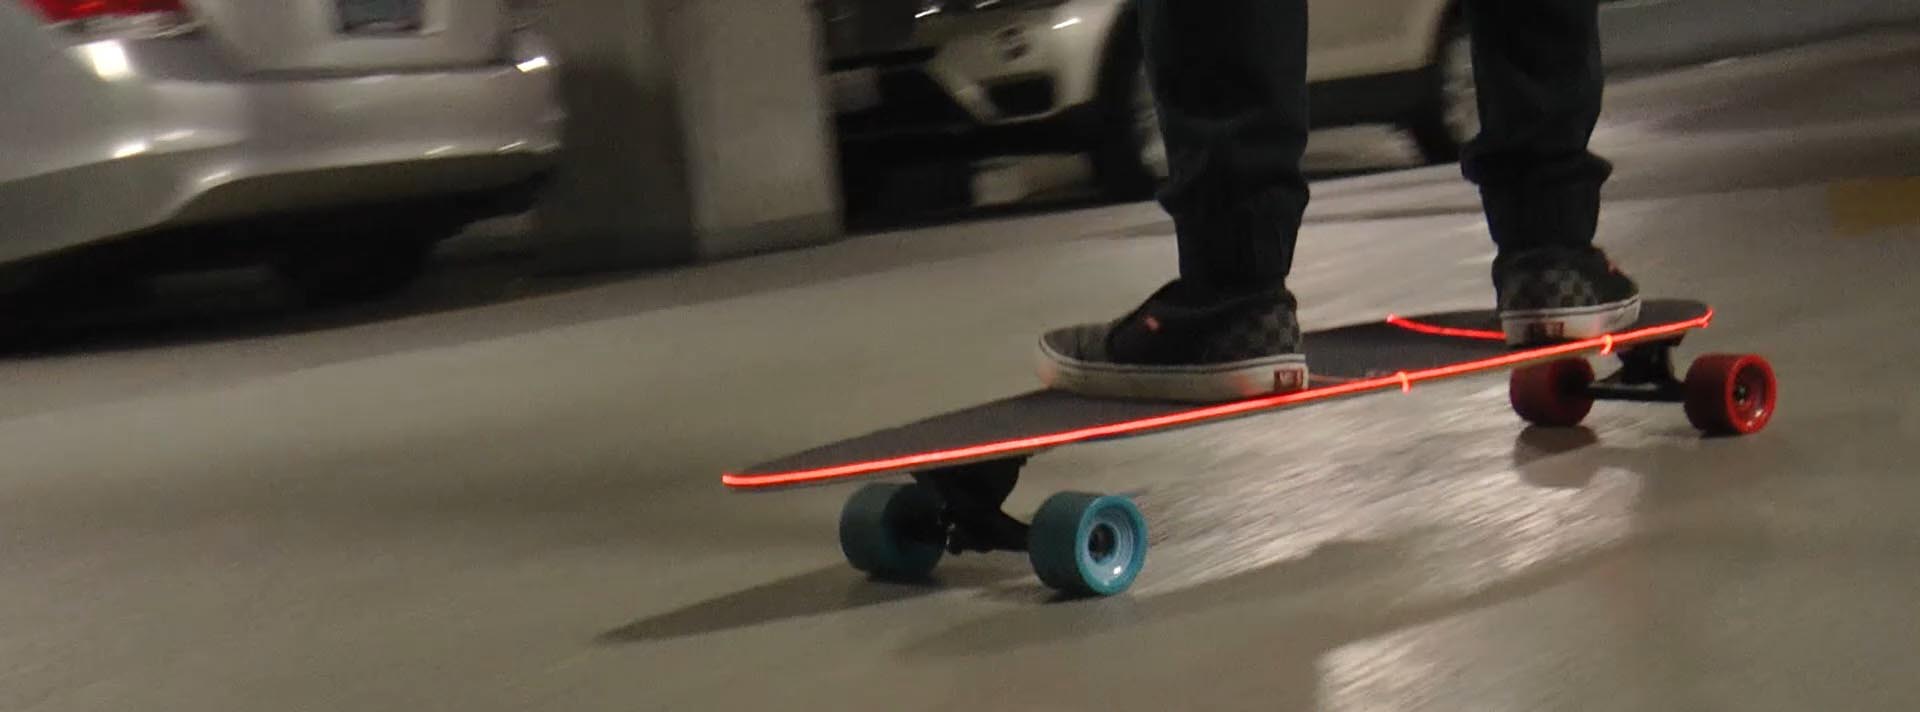 laser wire integrated onto skateboard